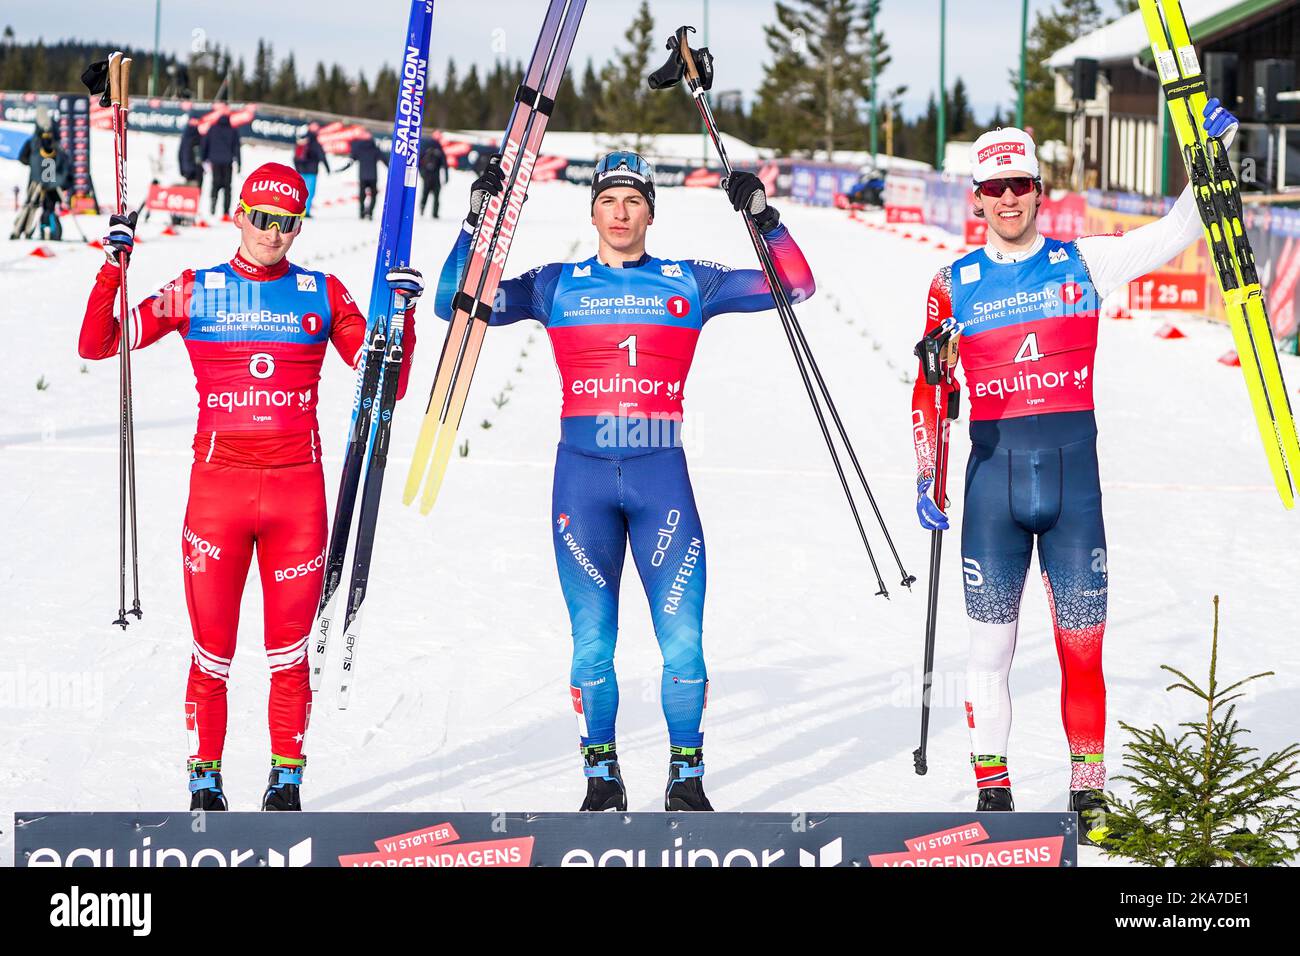 Lygna 20220226. Denis Filimonov from Russia (left) in second place, winner Valerio Grond from Switzerland and Magnus Ã˜yaas HÃ¥brekke from Norway in third place after the final of the 1.2 km sprint free technique for the U-23 World Ski Championships at Lygna. Photo: Terje Pedersen / NTB  Stock Photo